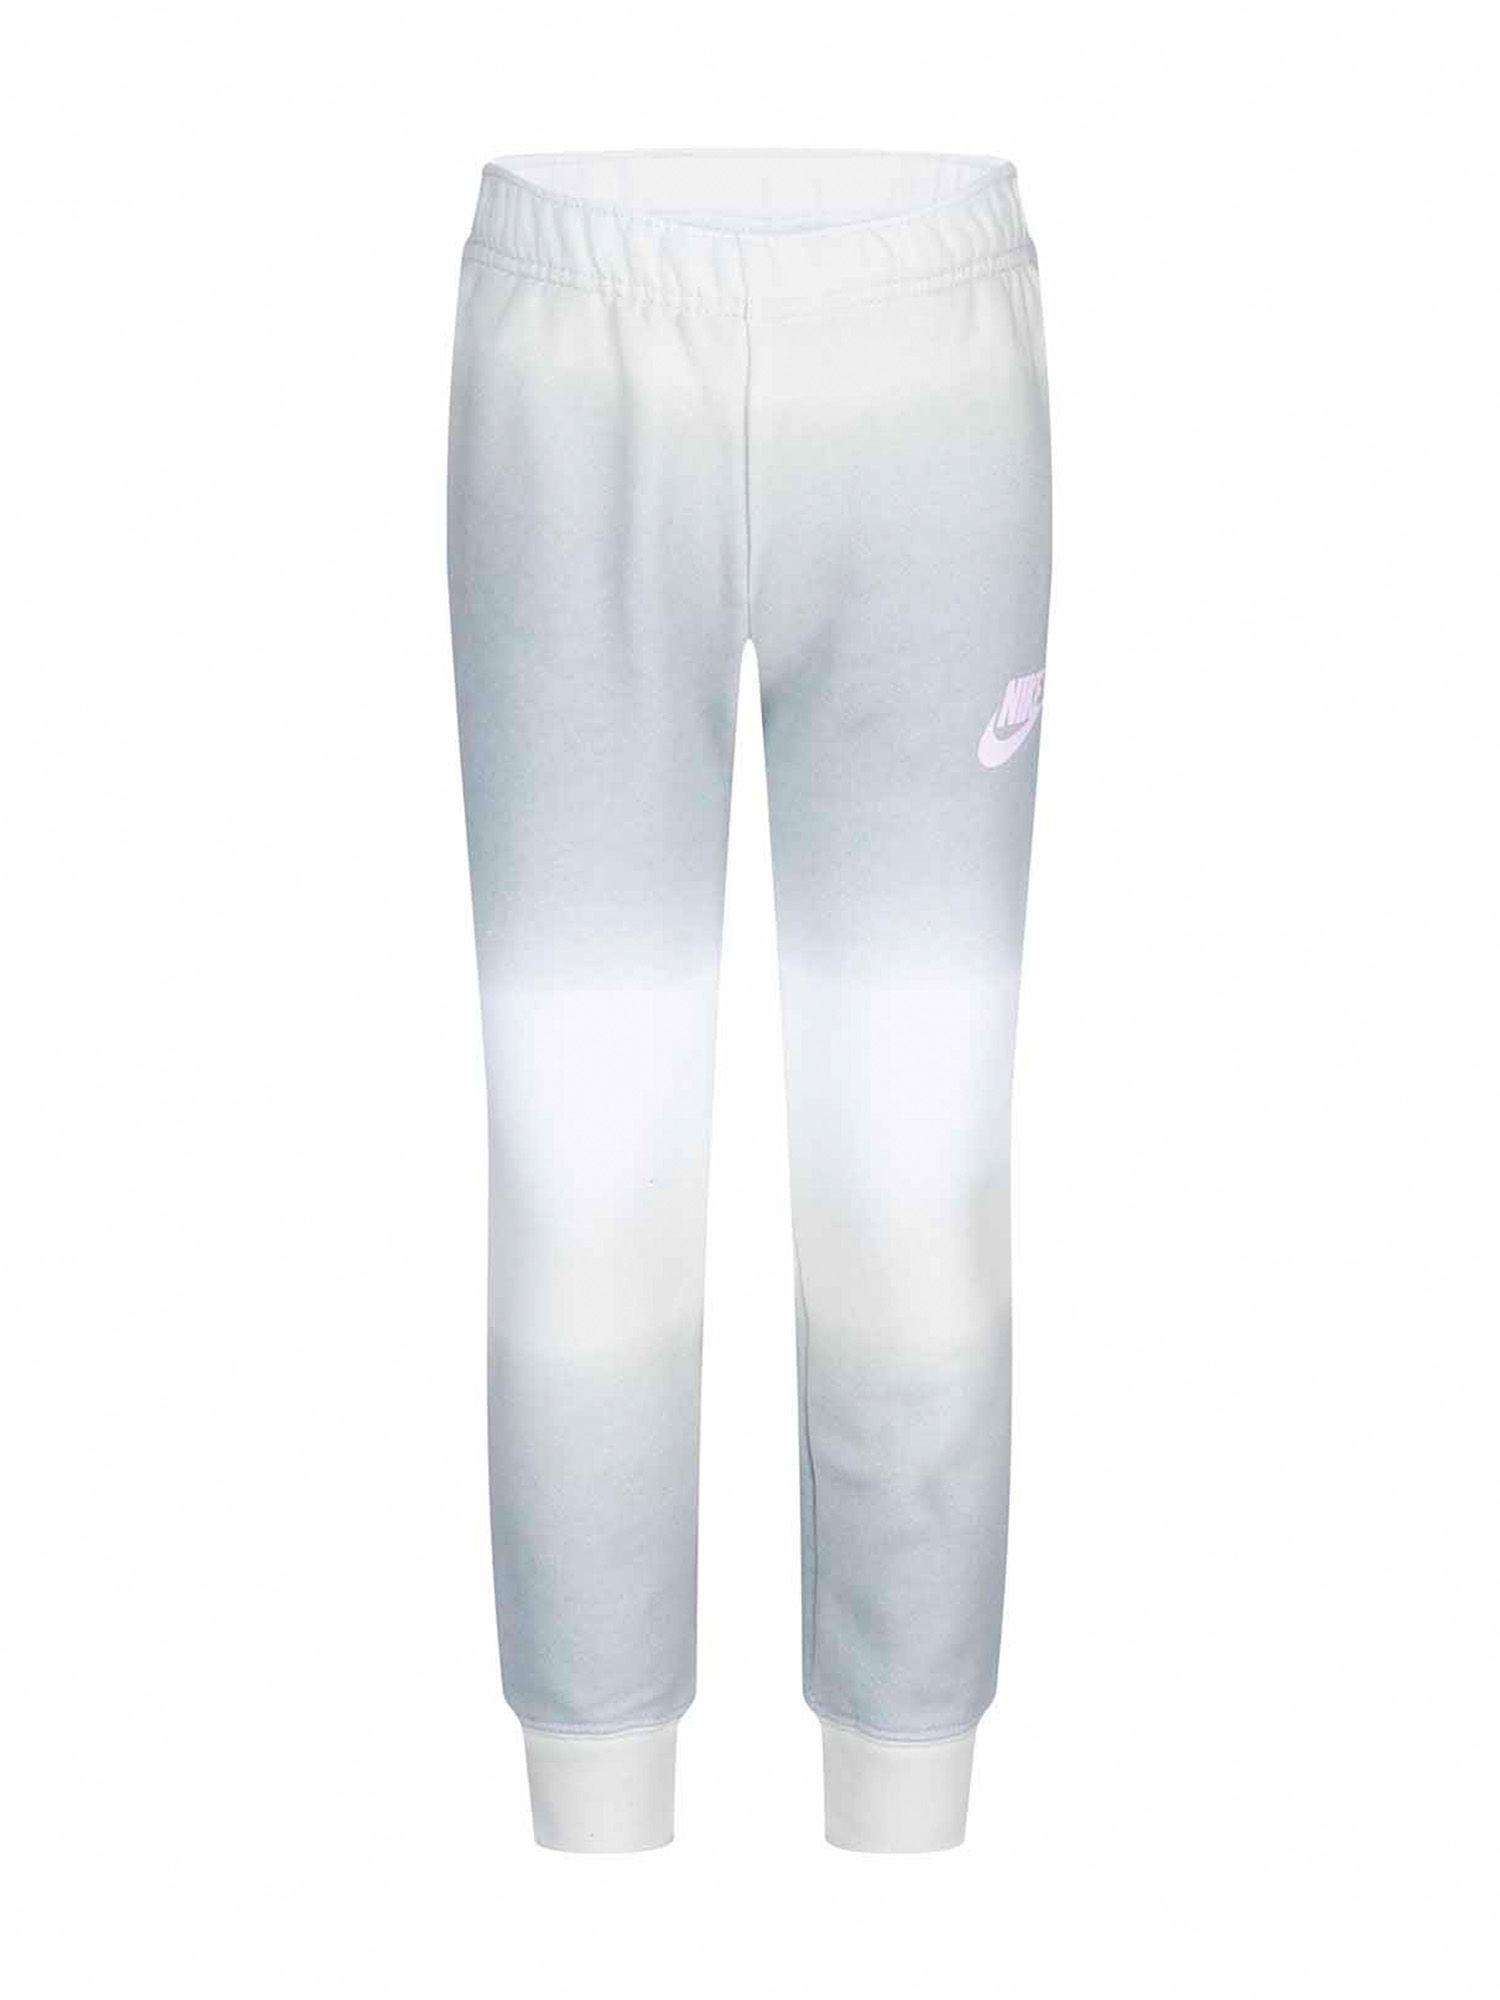 girls grey ombre joggers